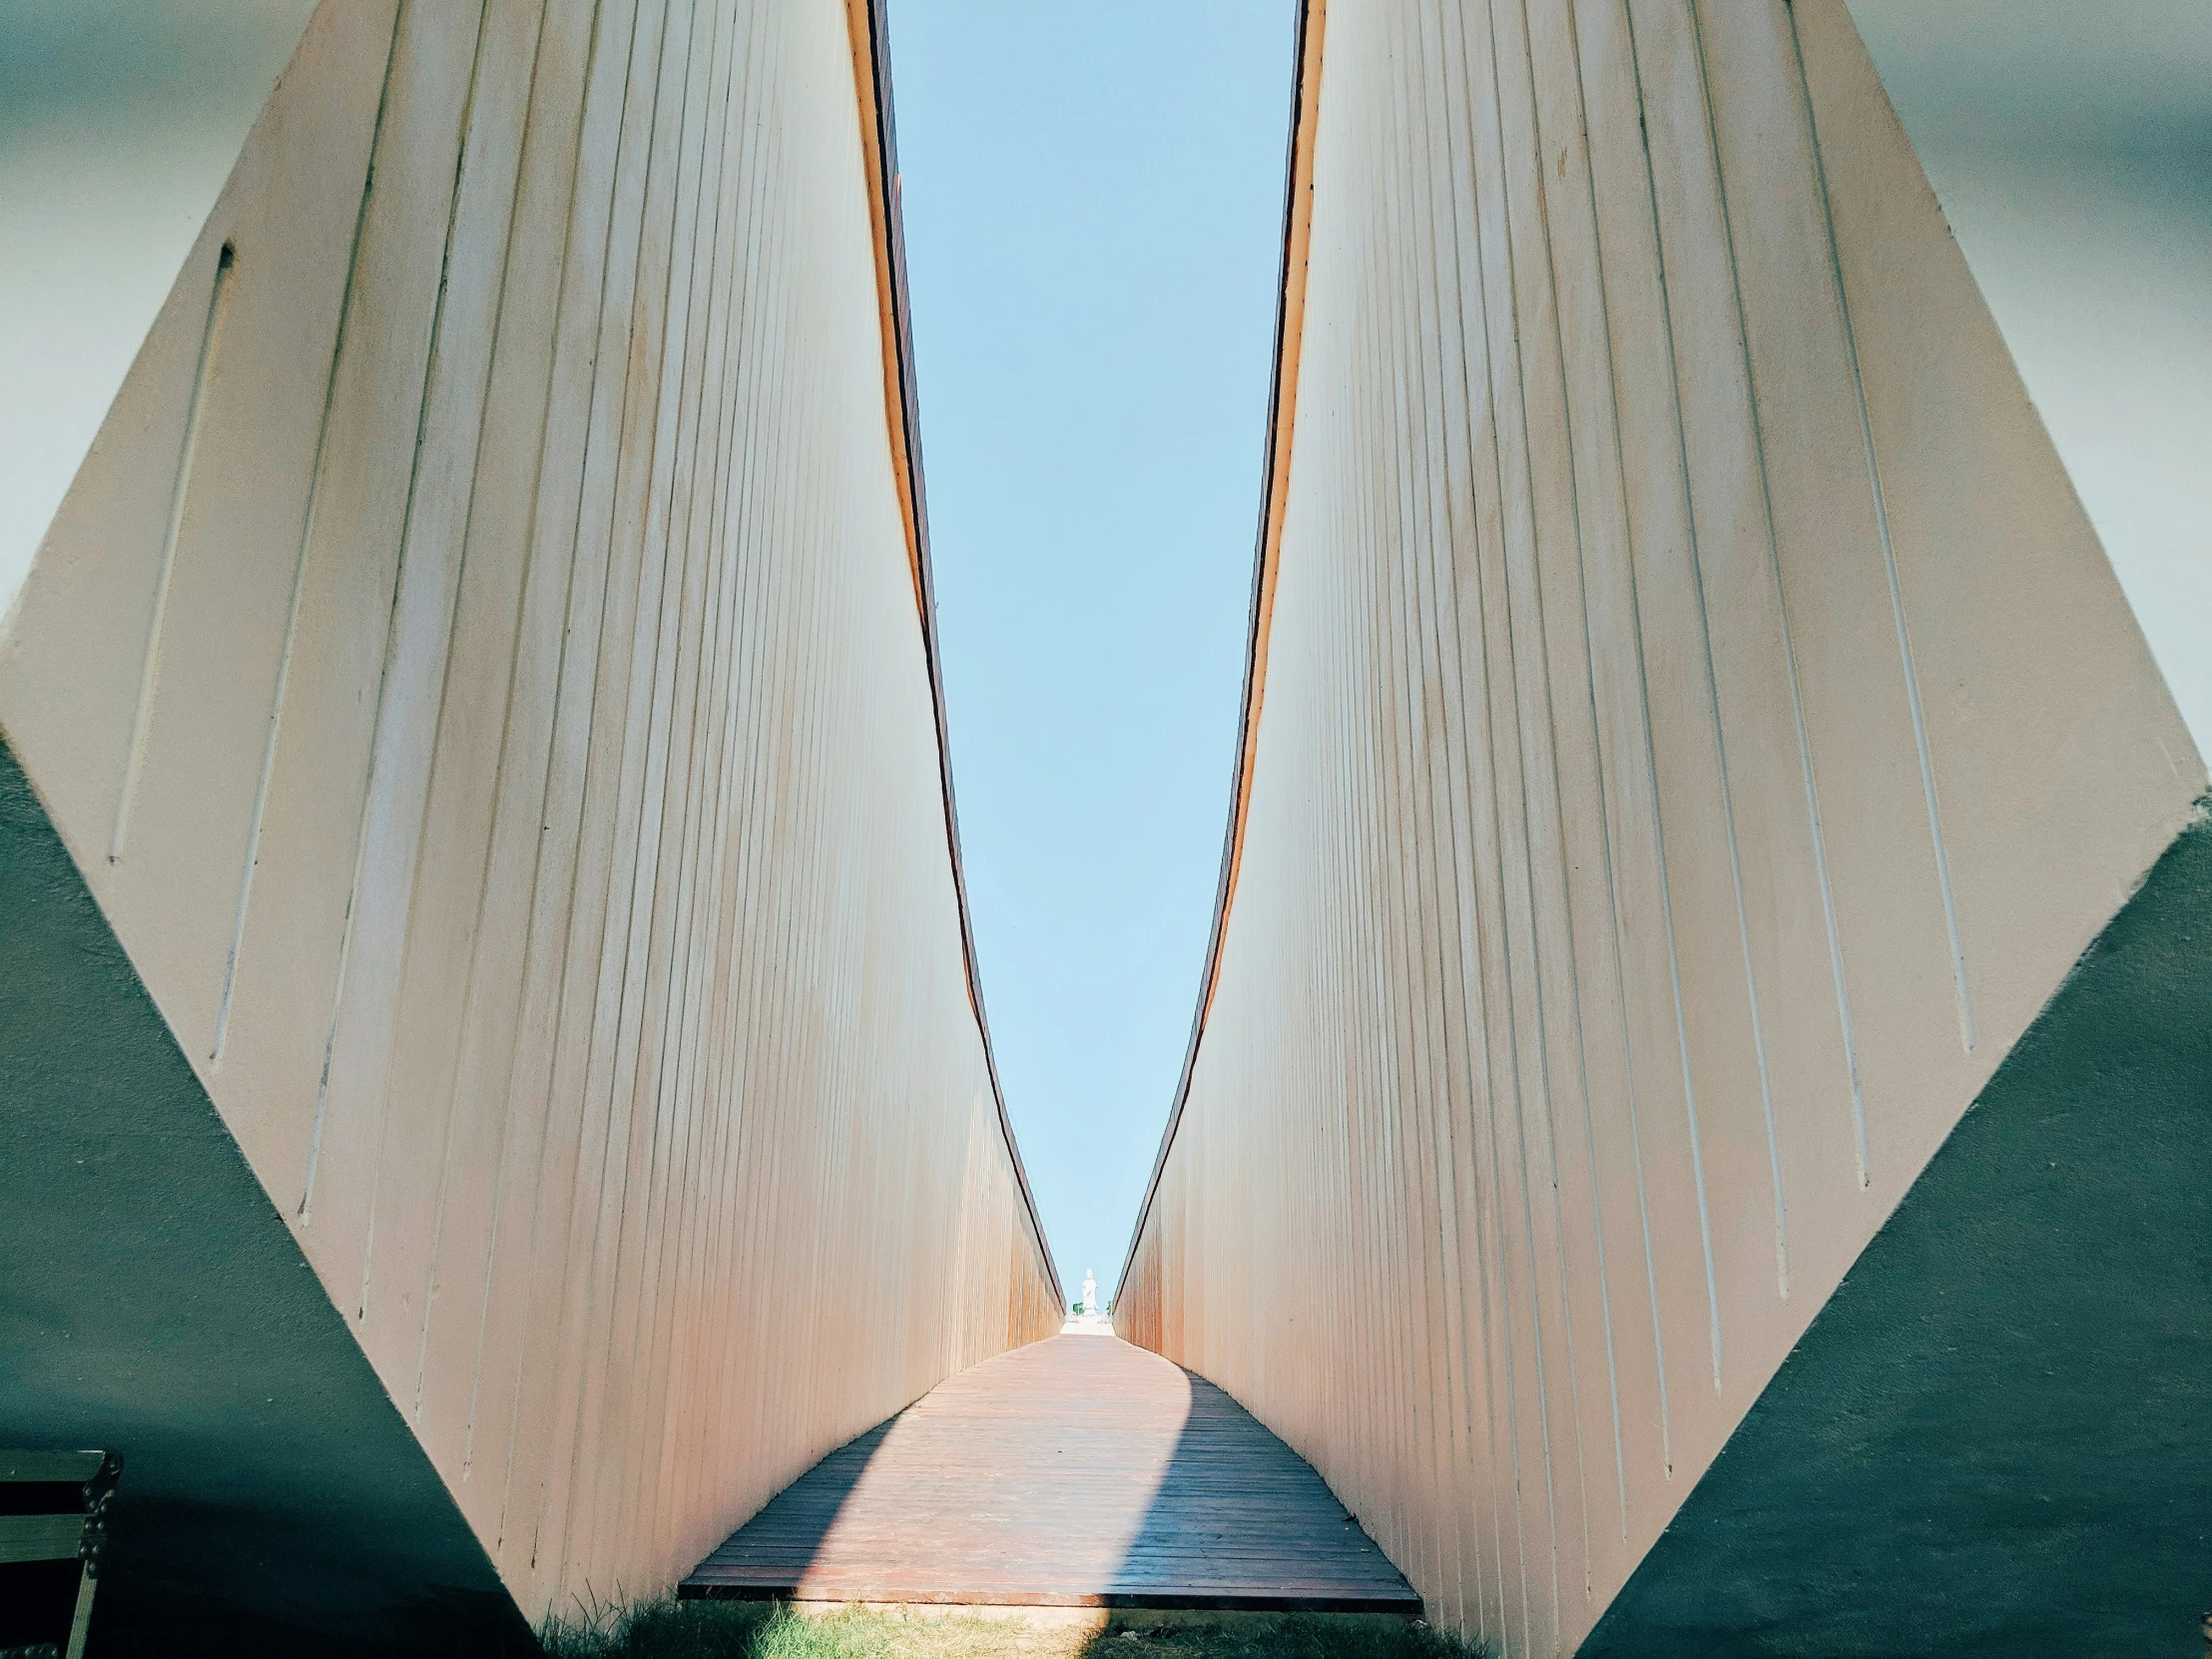 view from below of two bridges at two different levels